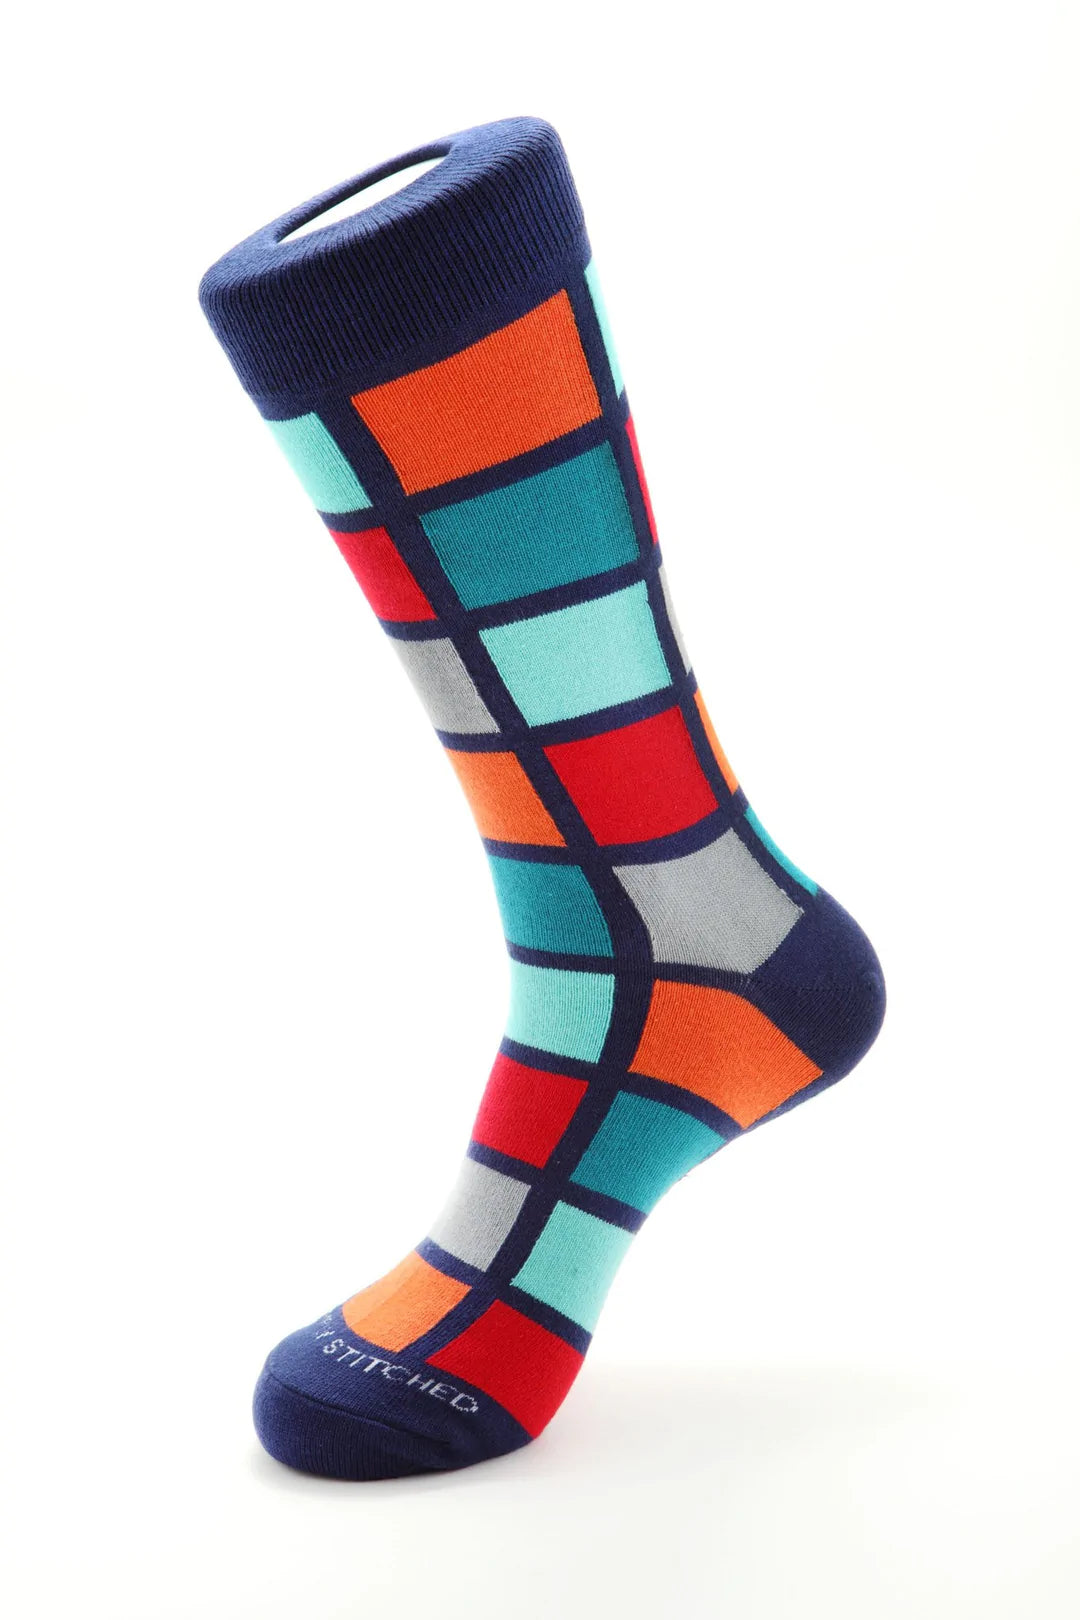 Unsimply Stitched socks with blue, orange, and multi colored square shapes, making it a great pairing with DFR89 blue denim jeans and a fun Sugar sport shirt.